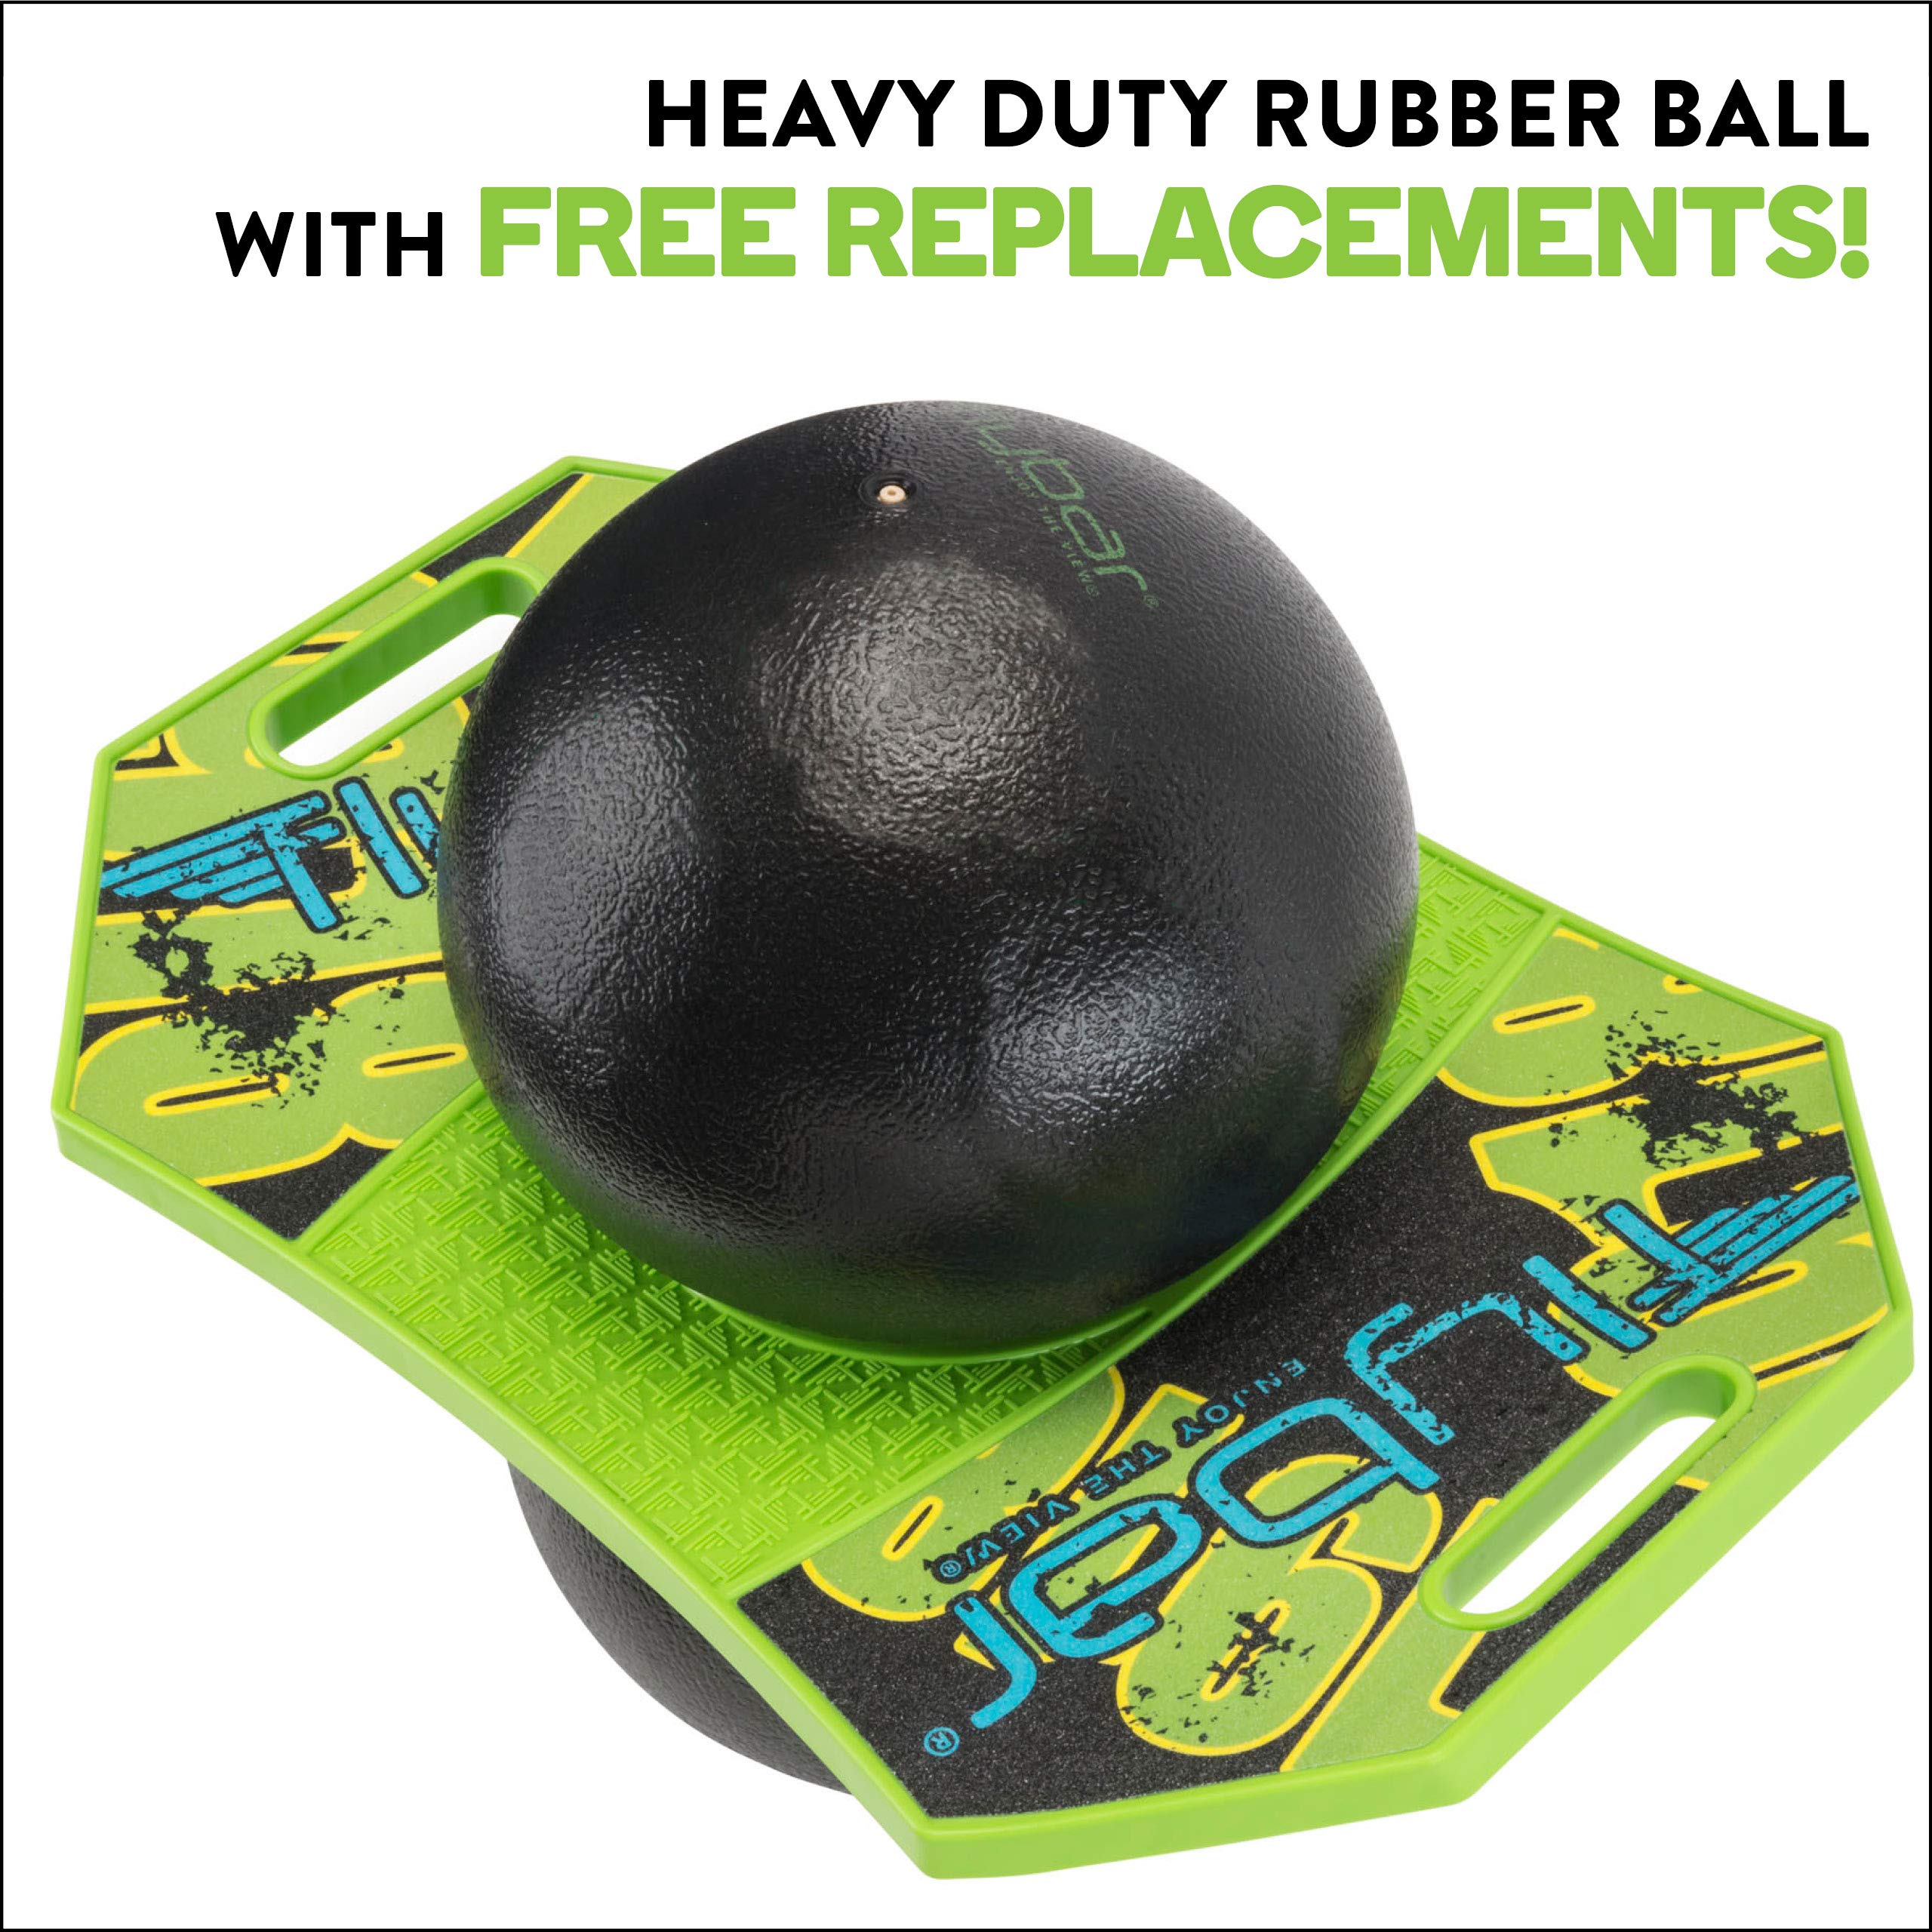 Flybar Pogo Trick Ball for Kids, Trick Bounce Board for Boys and Girls Ages 6+, Up to 160 lbs, Includes Pump, Easy to Carry Handle, Durable Plastic Deck Indoor, Outdoor Toy Pogo Jumper